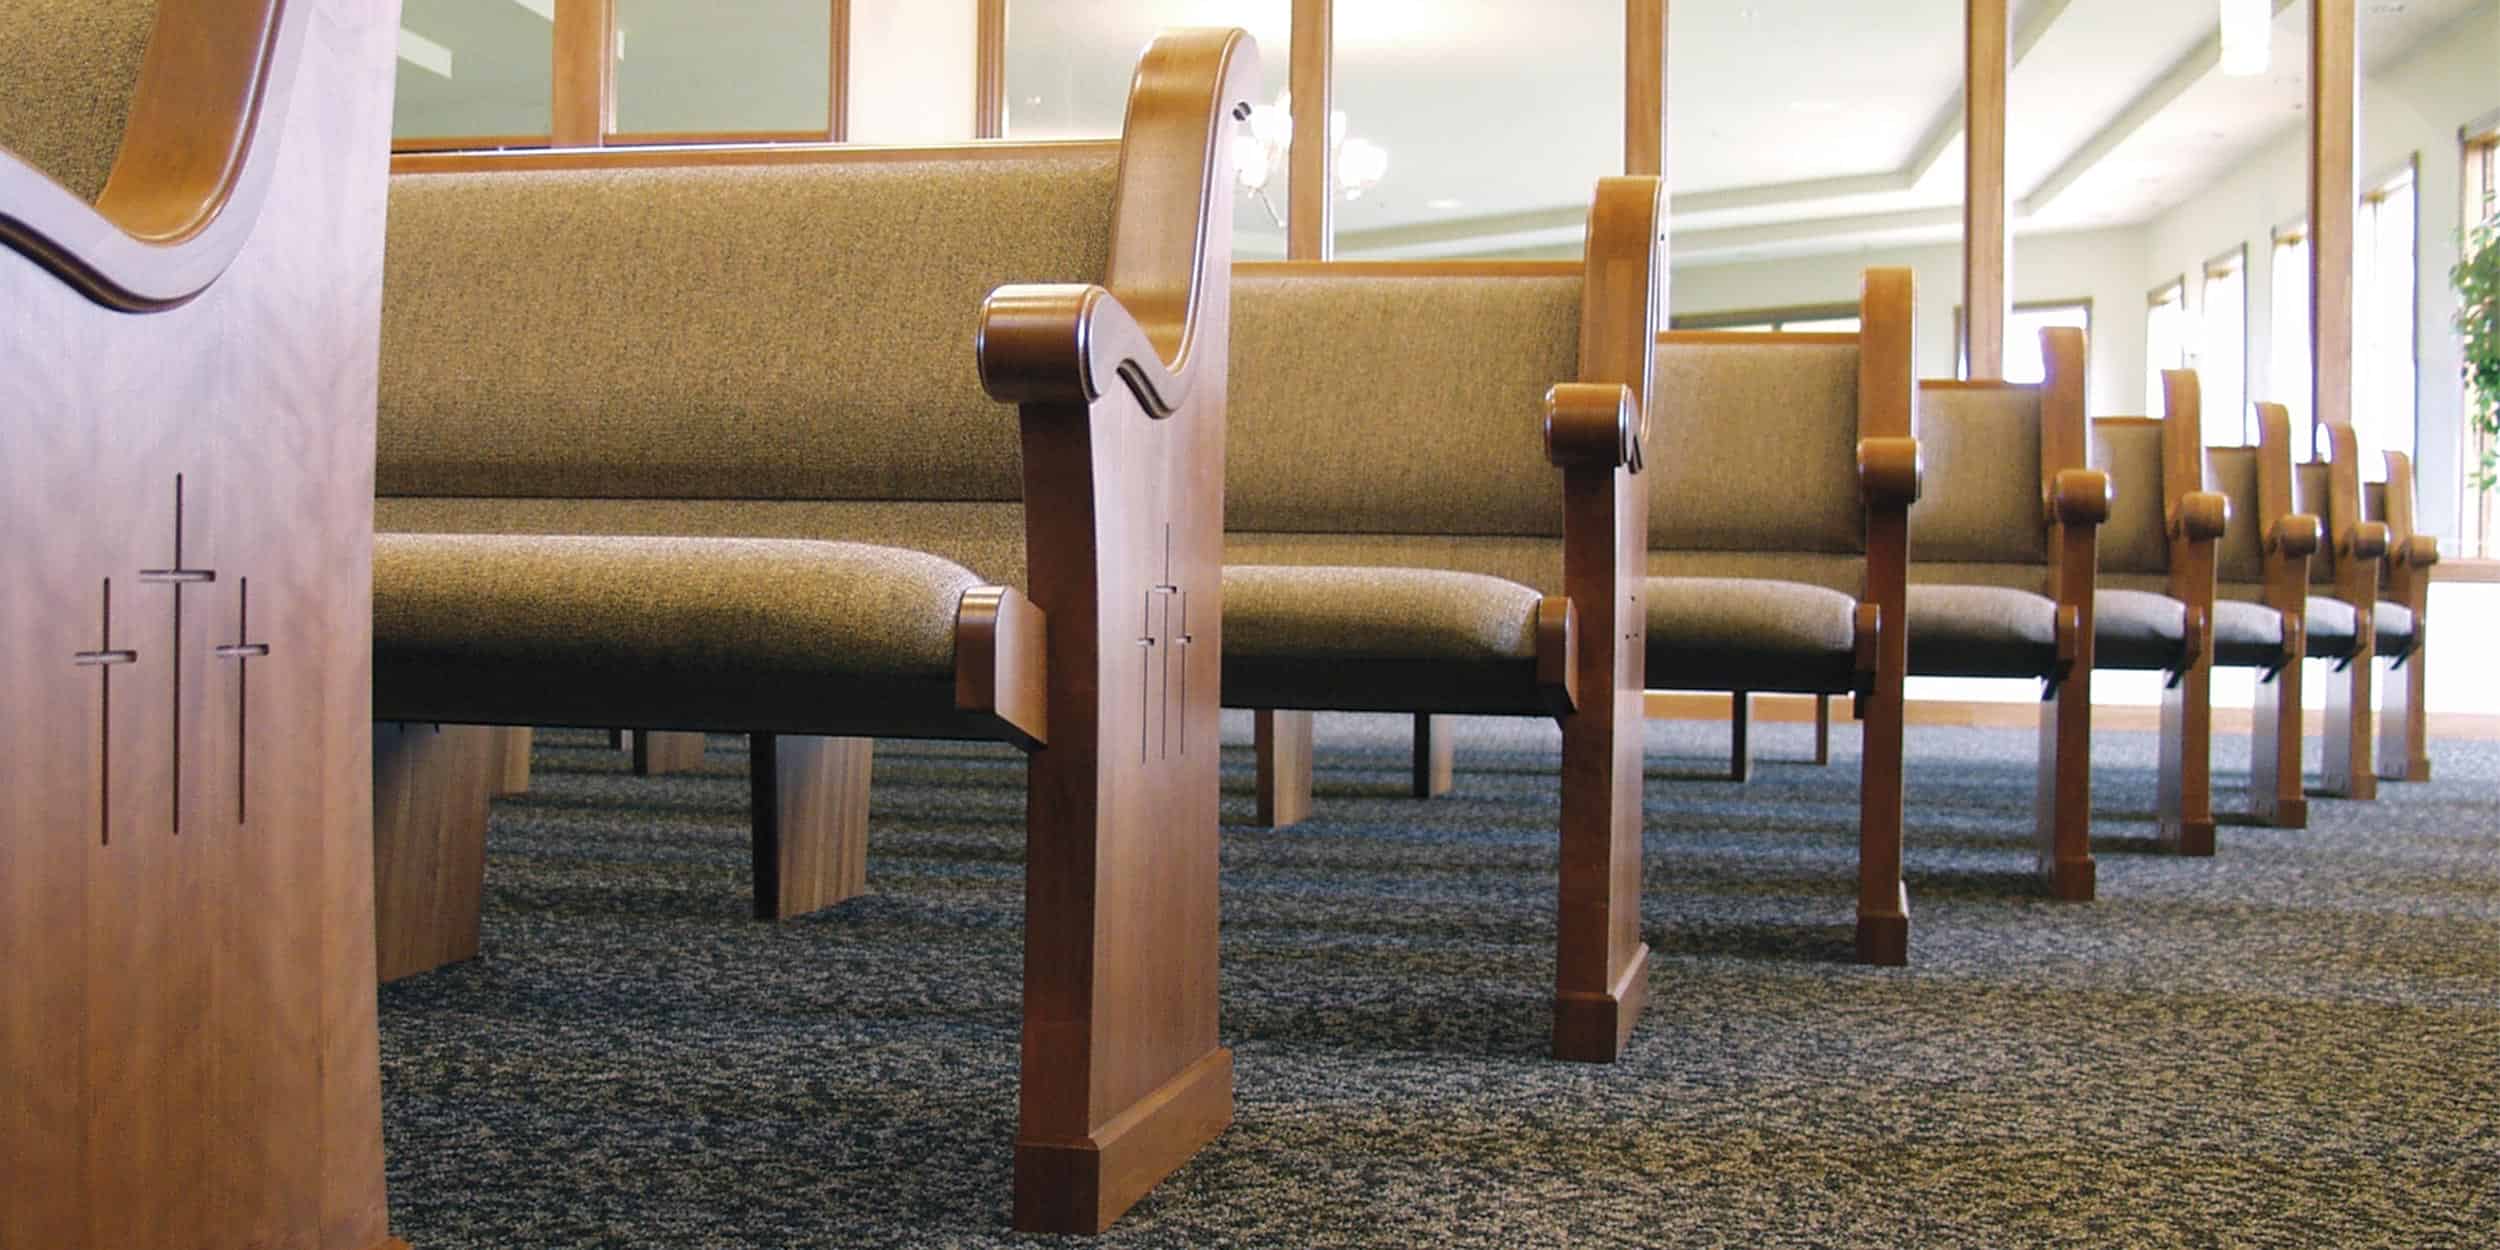 Closeup of Pews from Sauder inside St. Johns Lutheran Church in Archbold, OH.